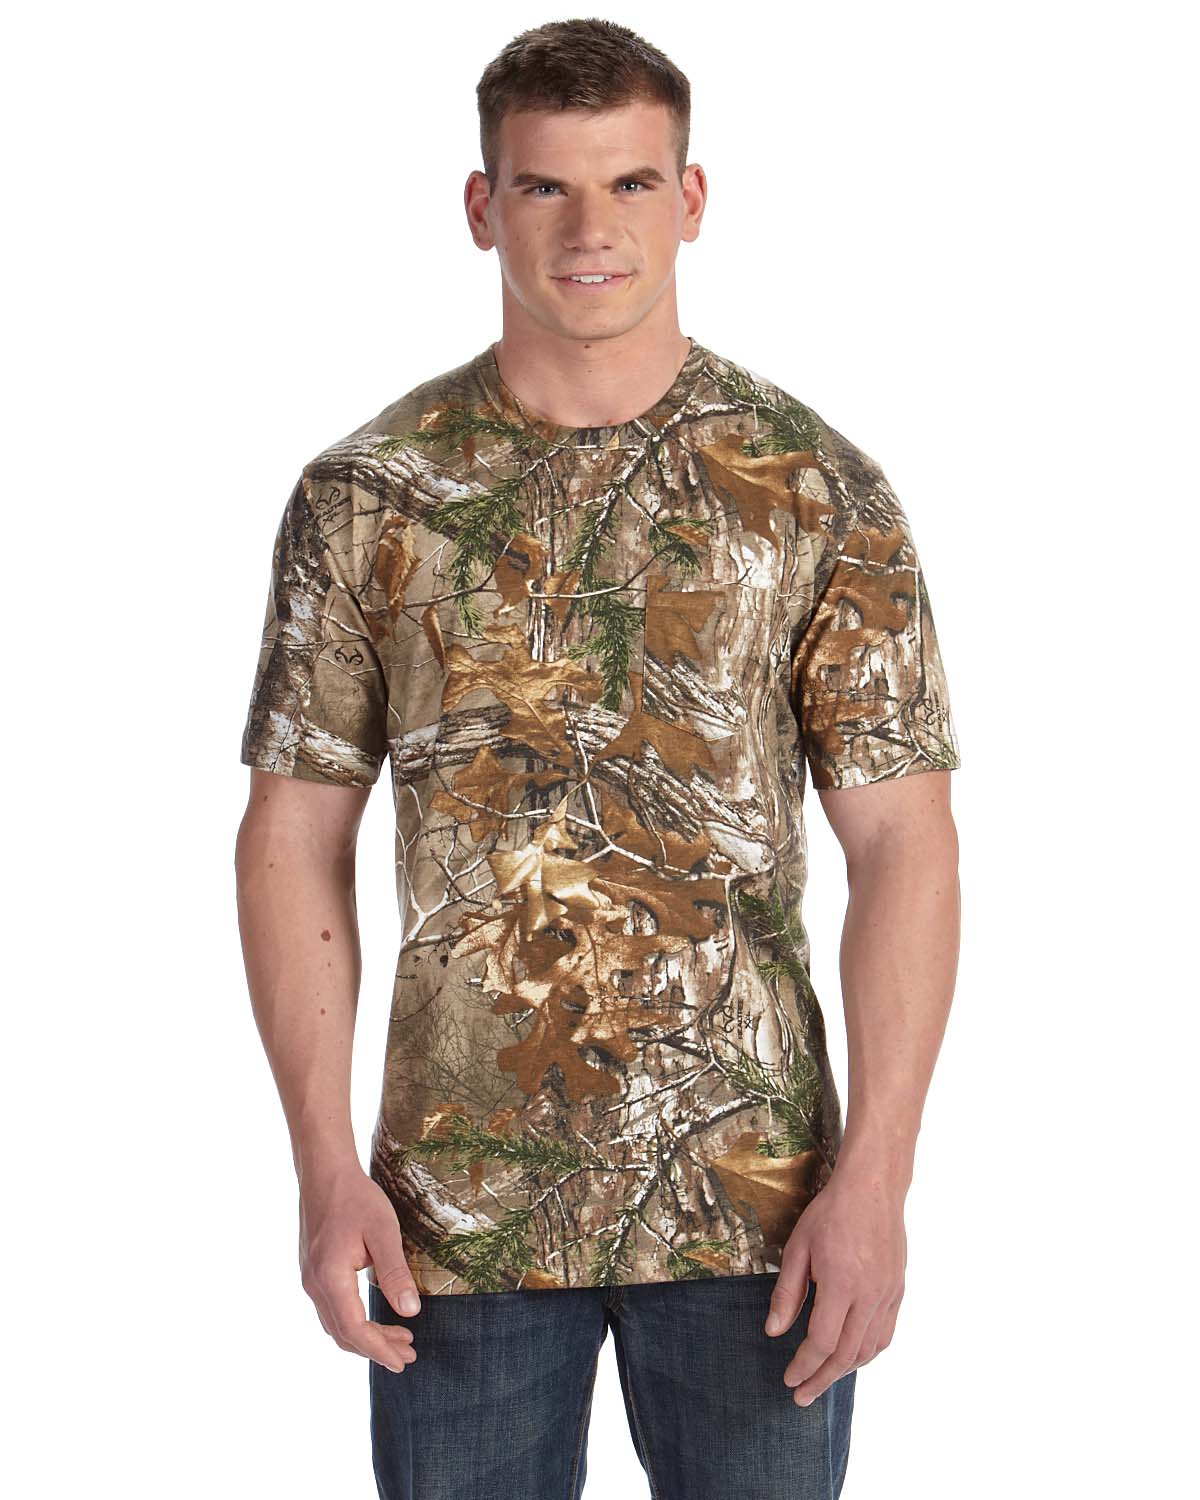 Officially Licensed REALTREE Camouflage Pocket T-Shirt